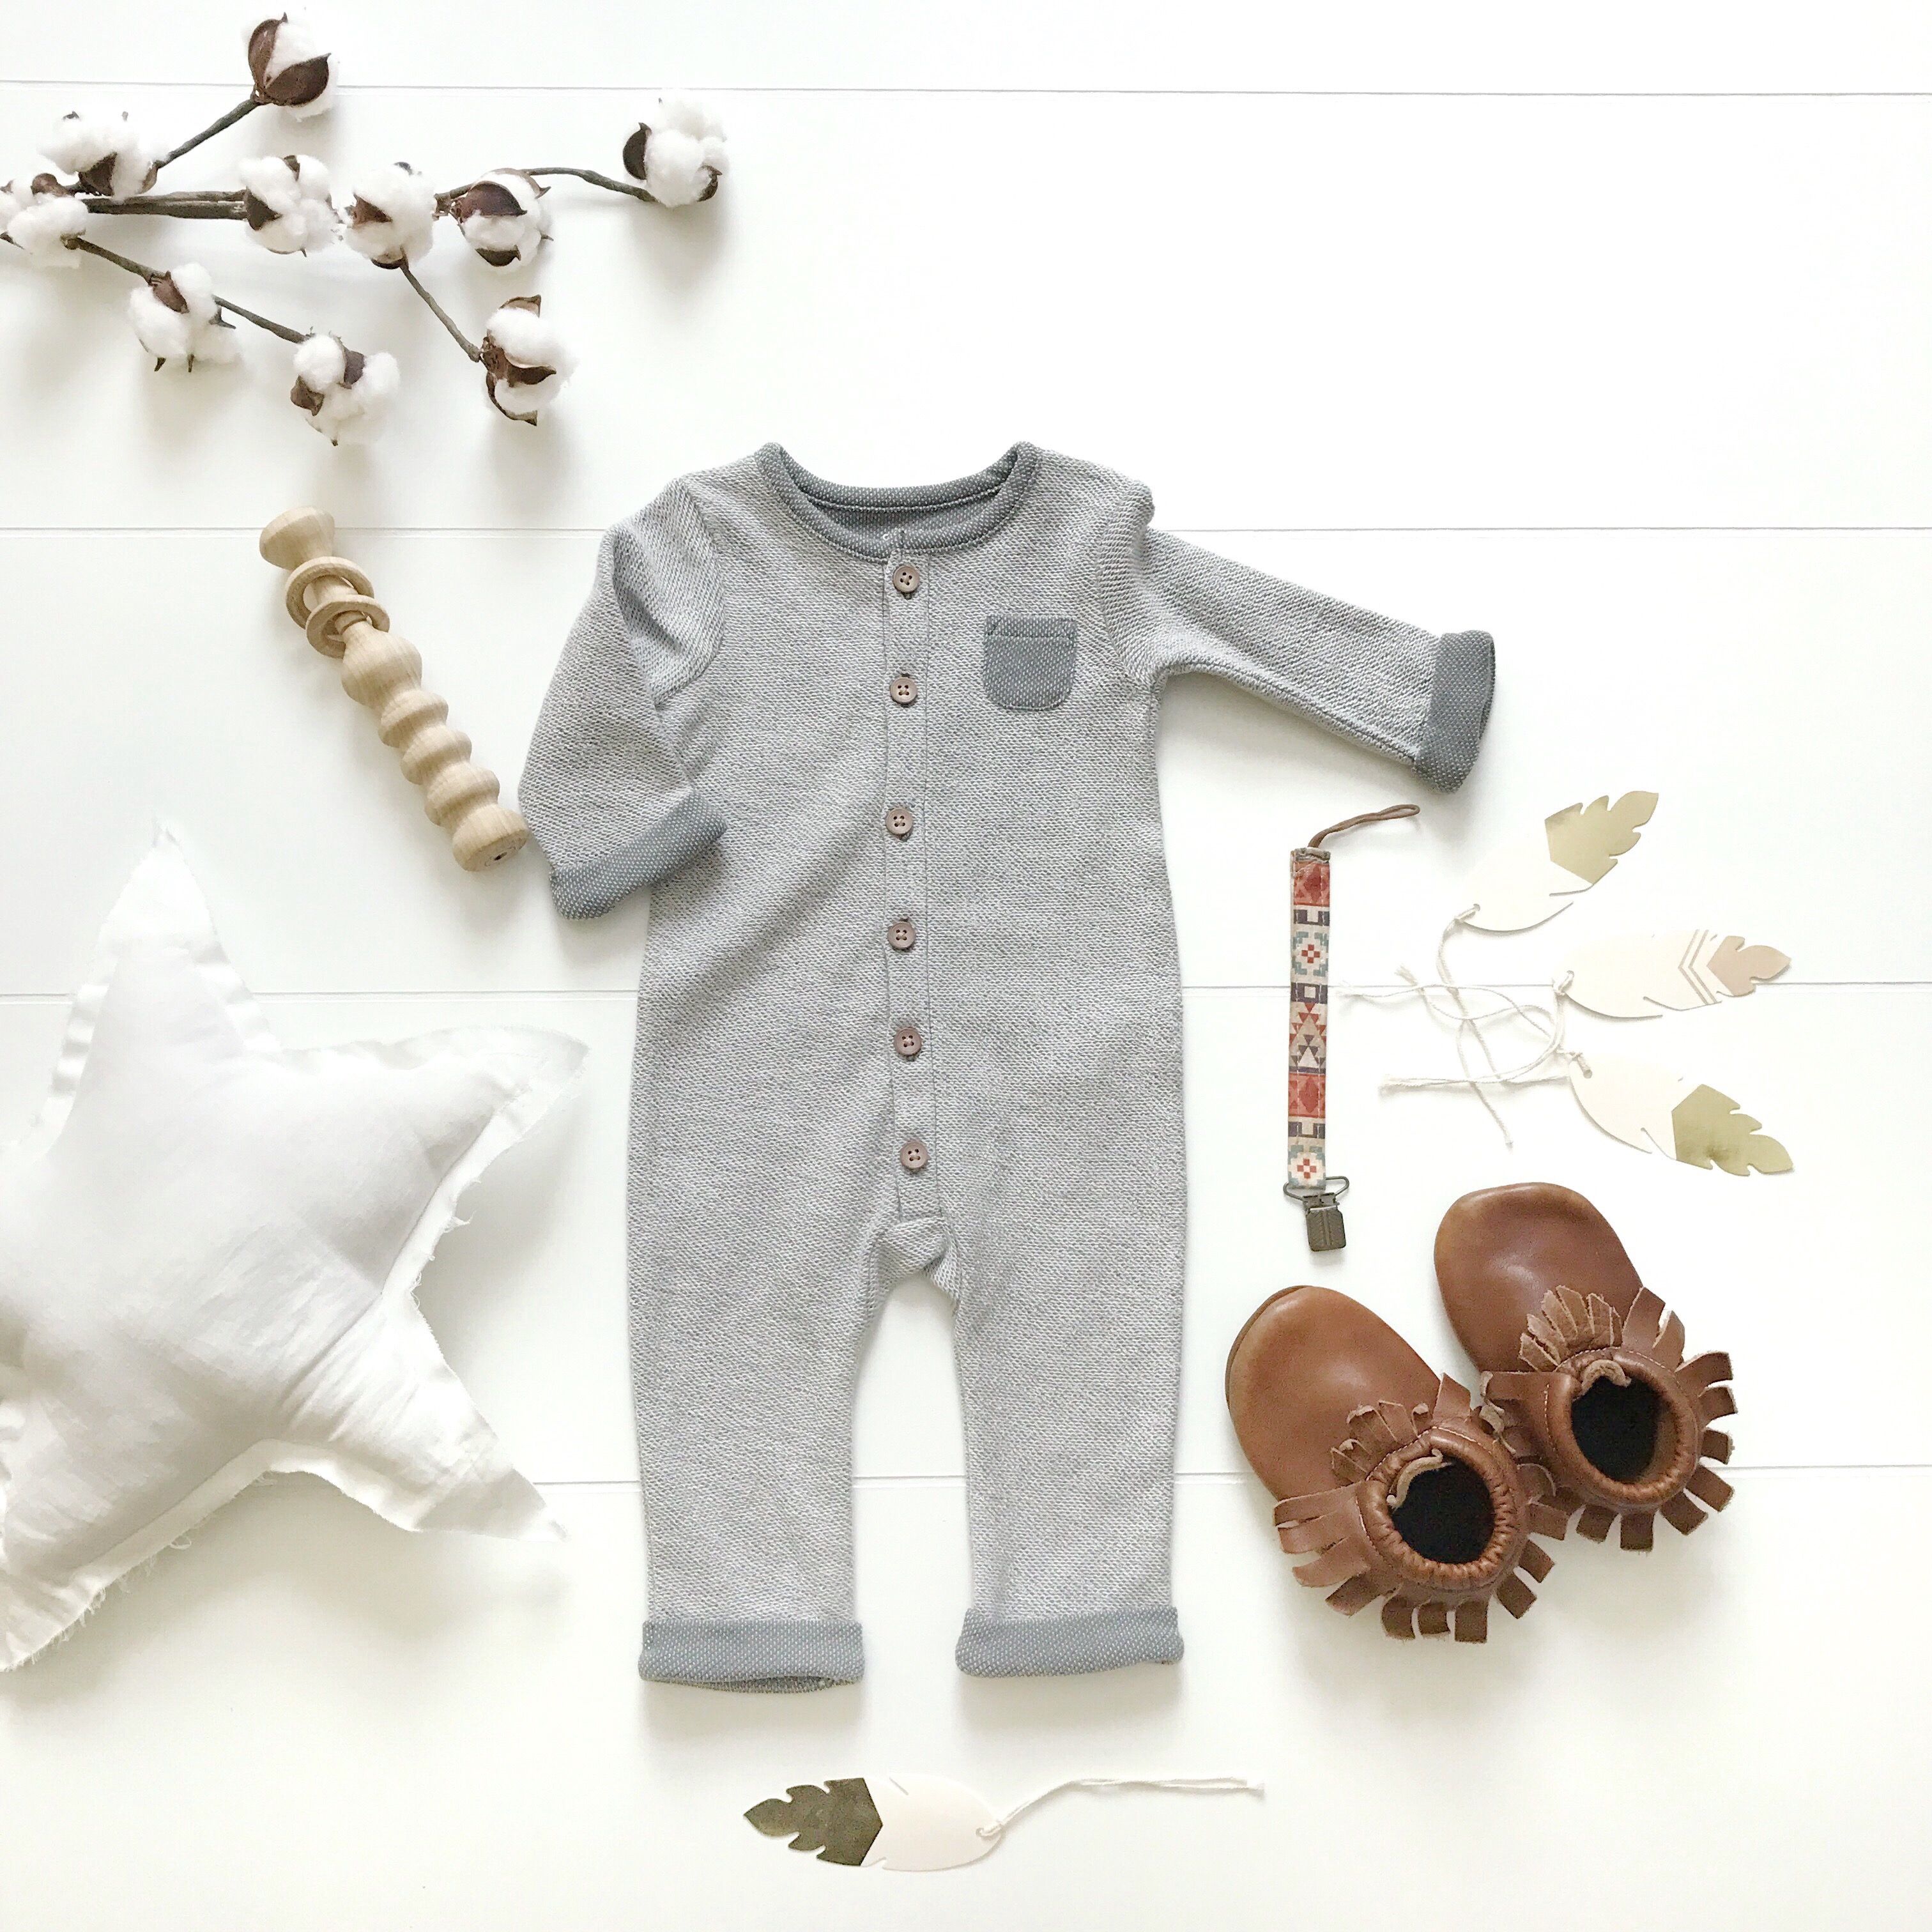 Fall Must-Haves From Carter's for baby and toddler! Baby boy fall outfit inspiration. Toddler boy fall outfit inspiration. Baby girl fall outfit must-haves. Toddler girl fall outfit must-haves.